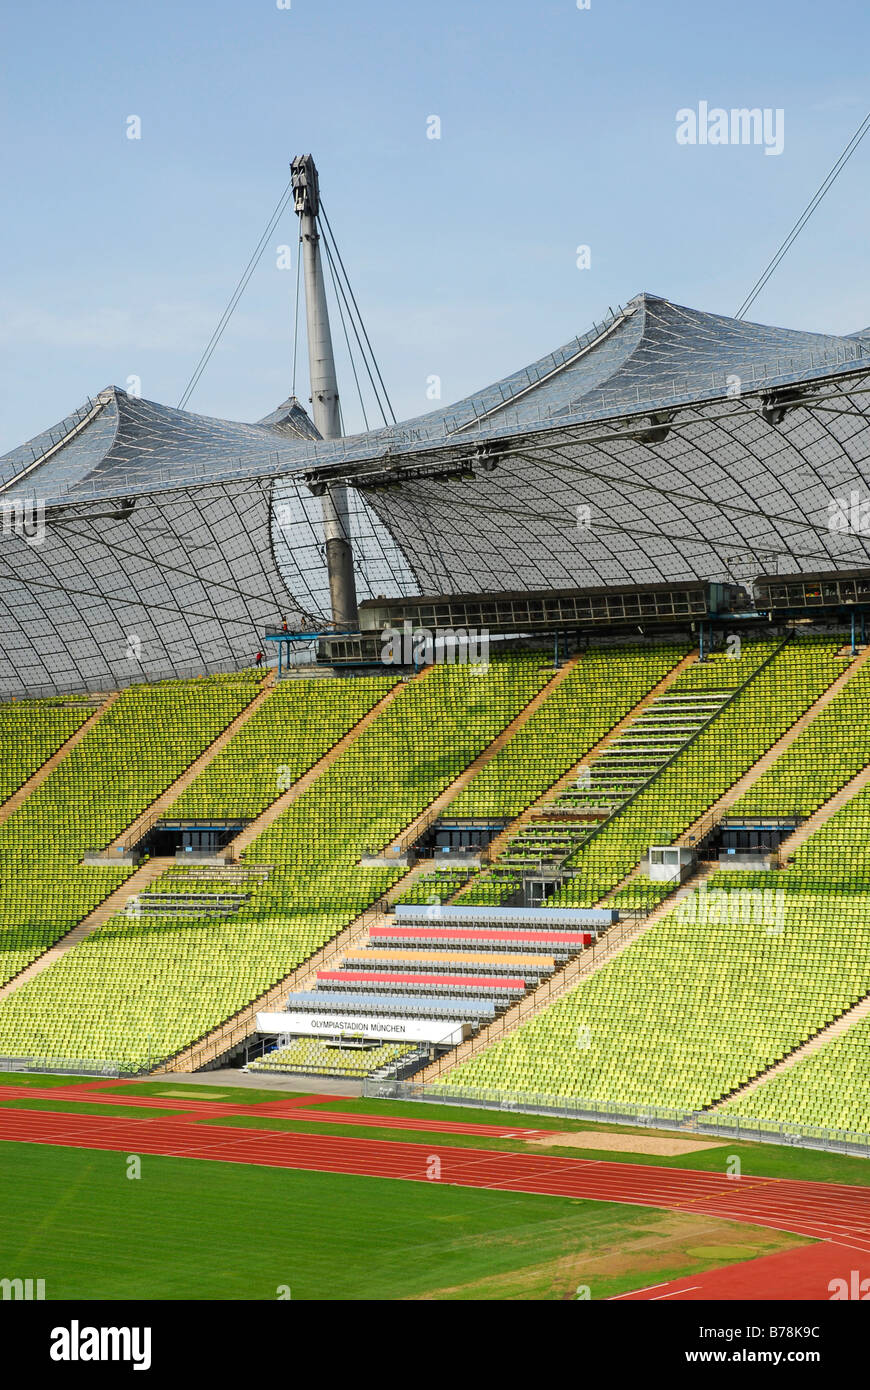 Olympia Park, Olympia Stadium at Olympiazentrum, Olympia Centre, modern architecture with an innovative roof construction, Muni Stock Photo